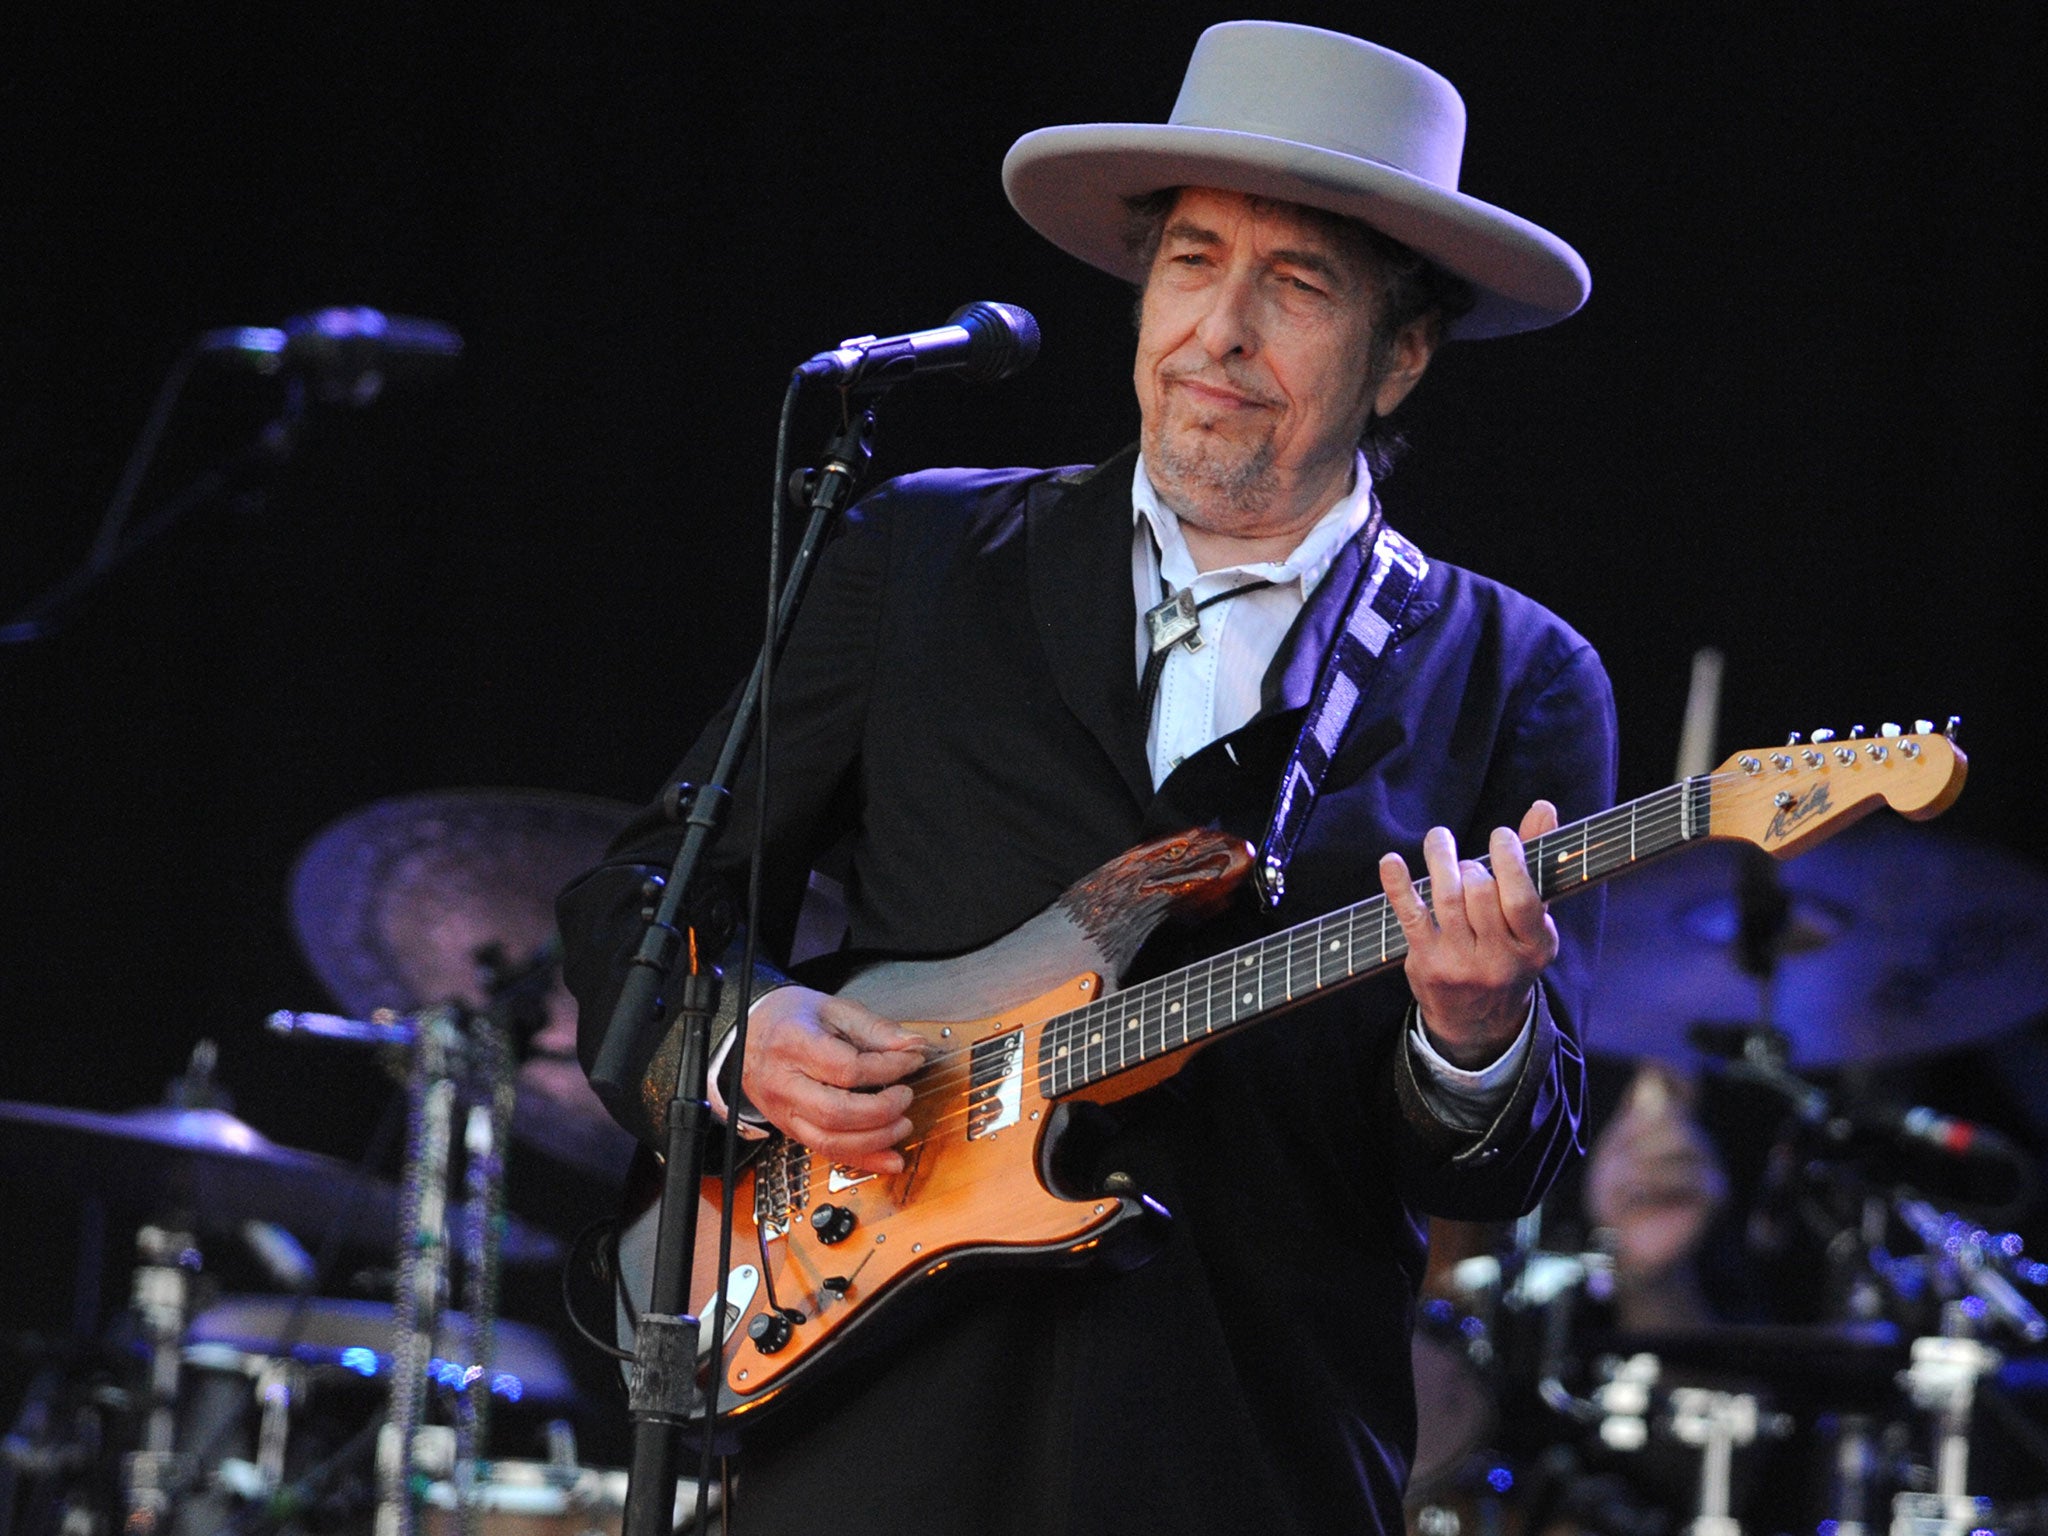 Singer songwriter Bob Dylan performs on stage